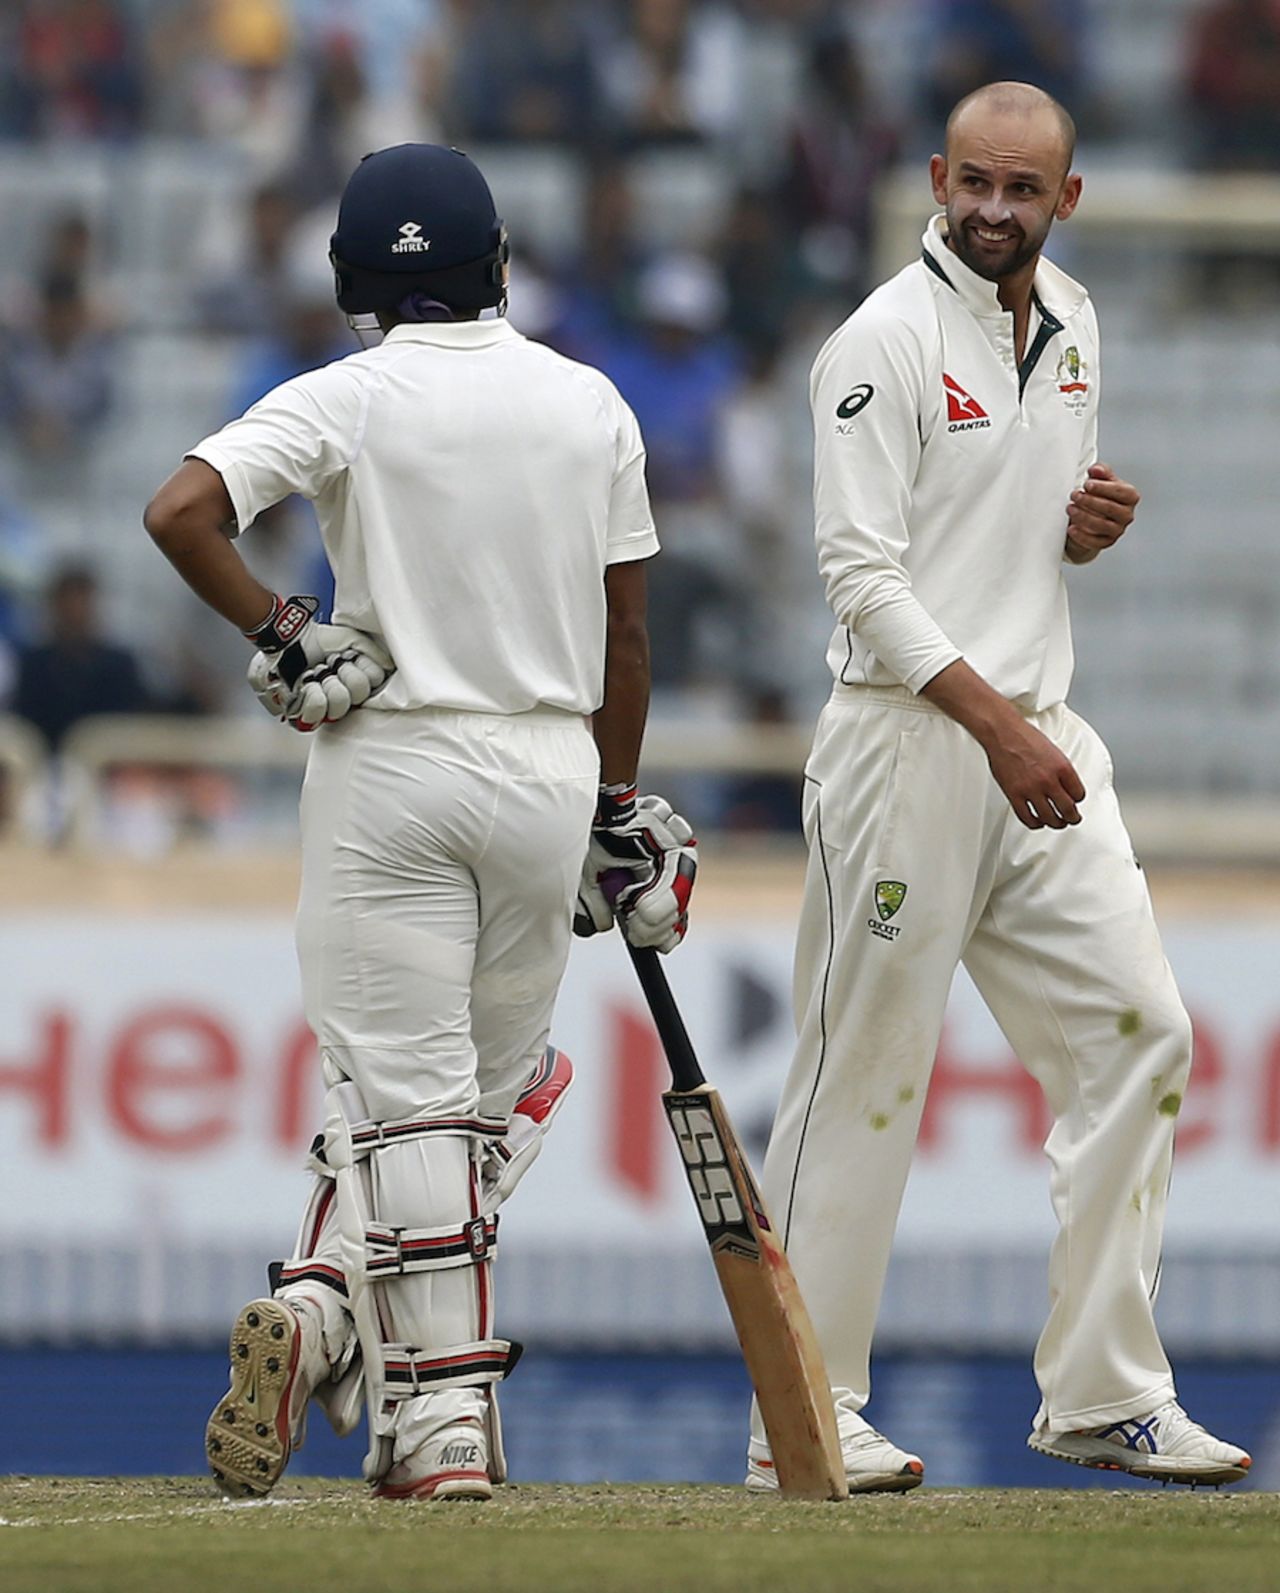 Nathan Lyon reacts after sending down a delivery, India v Australia, 3rd Test, Ranchi, 4th day, March 19, 2017